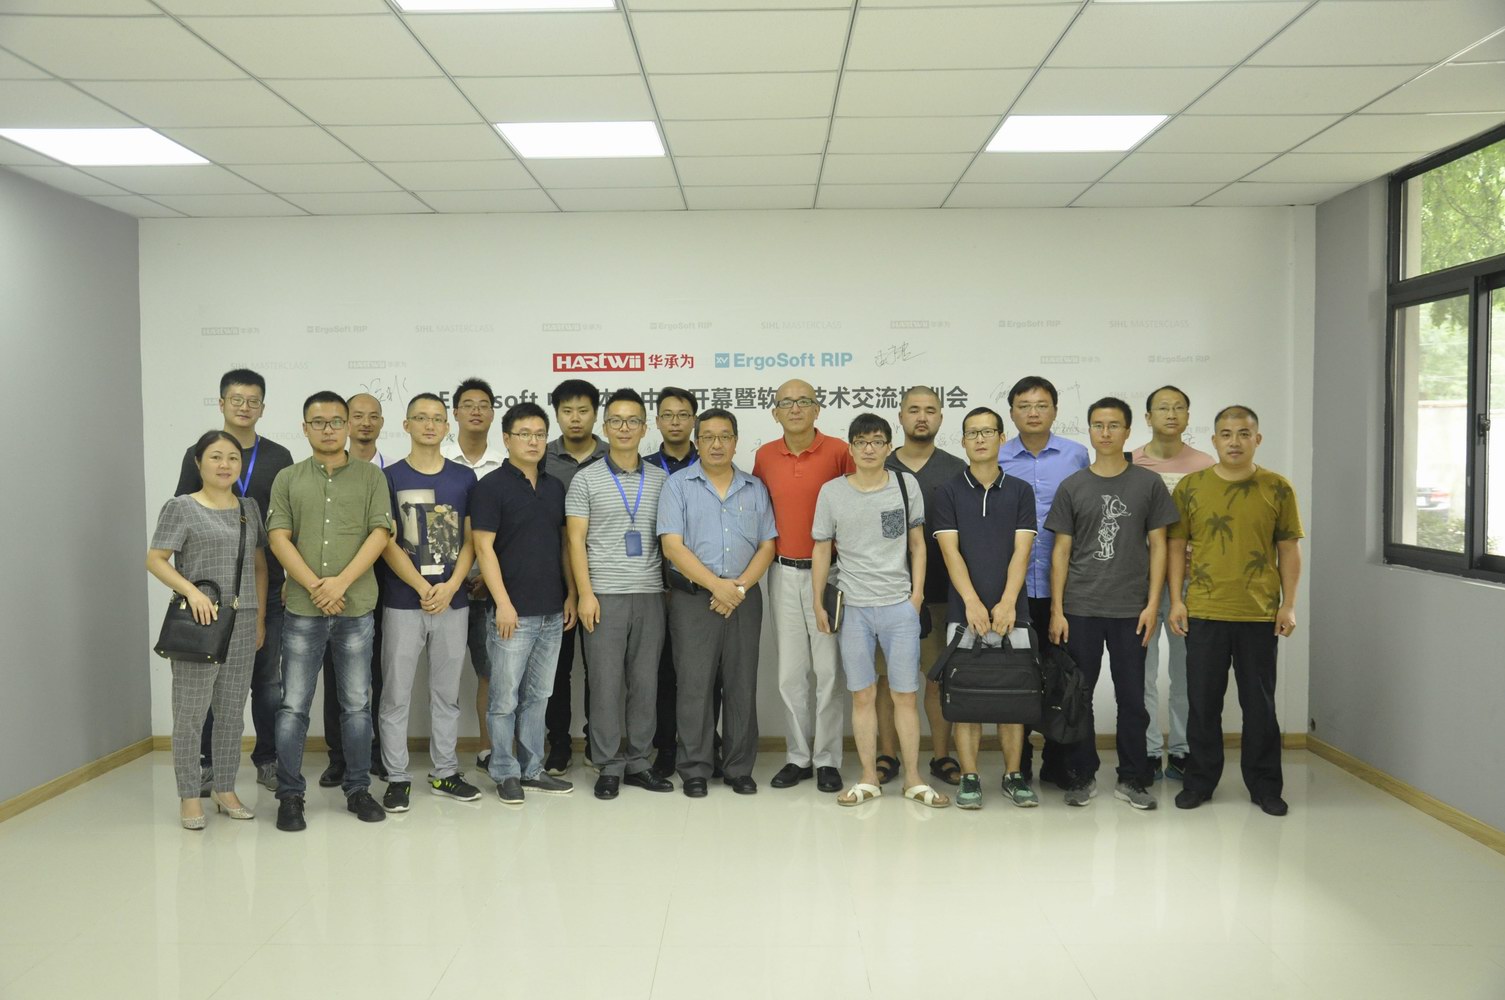 Ergosoft Reseller In China Opens Its New Experience Center Ergosoft High Fidelity Rip Software Solutions